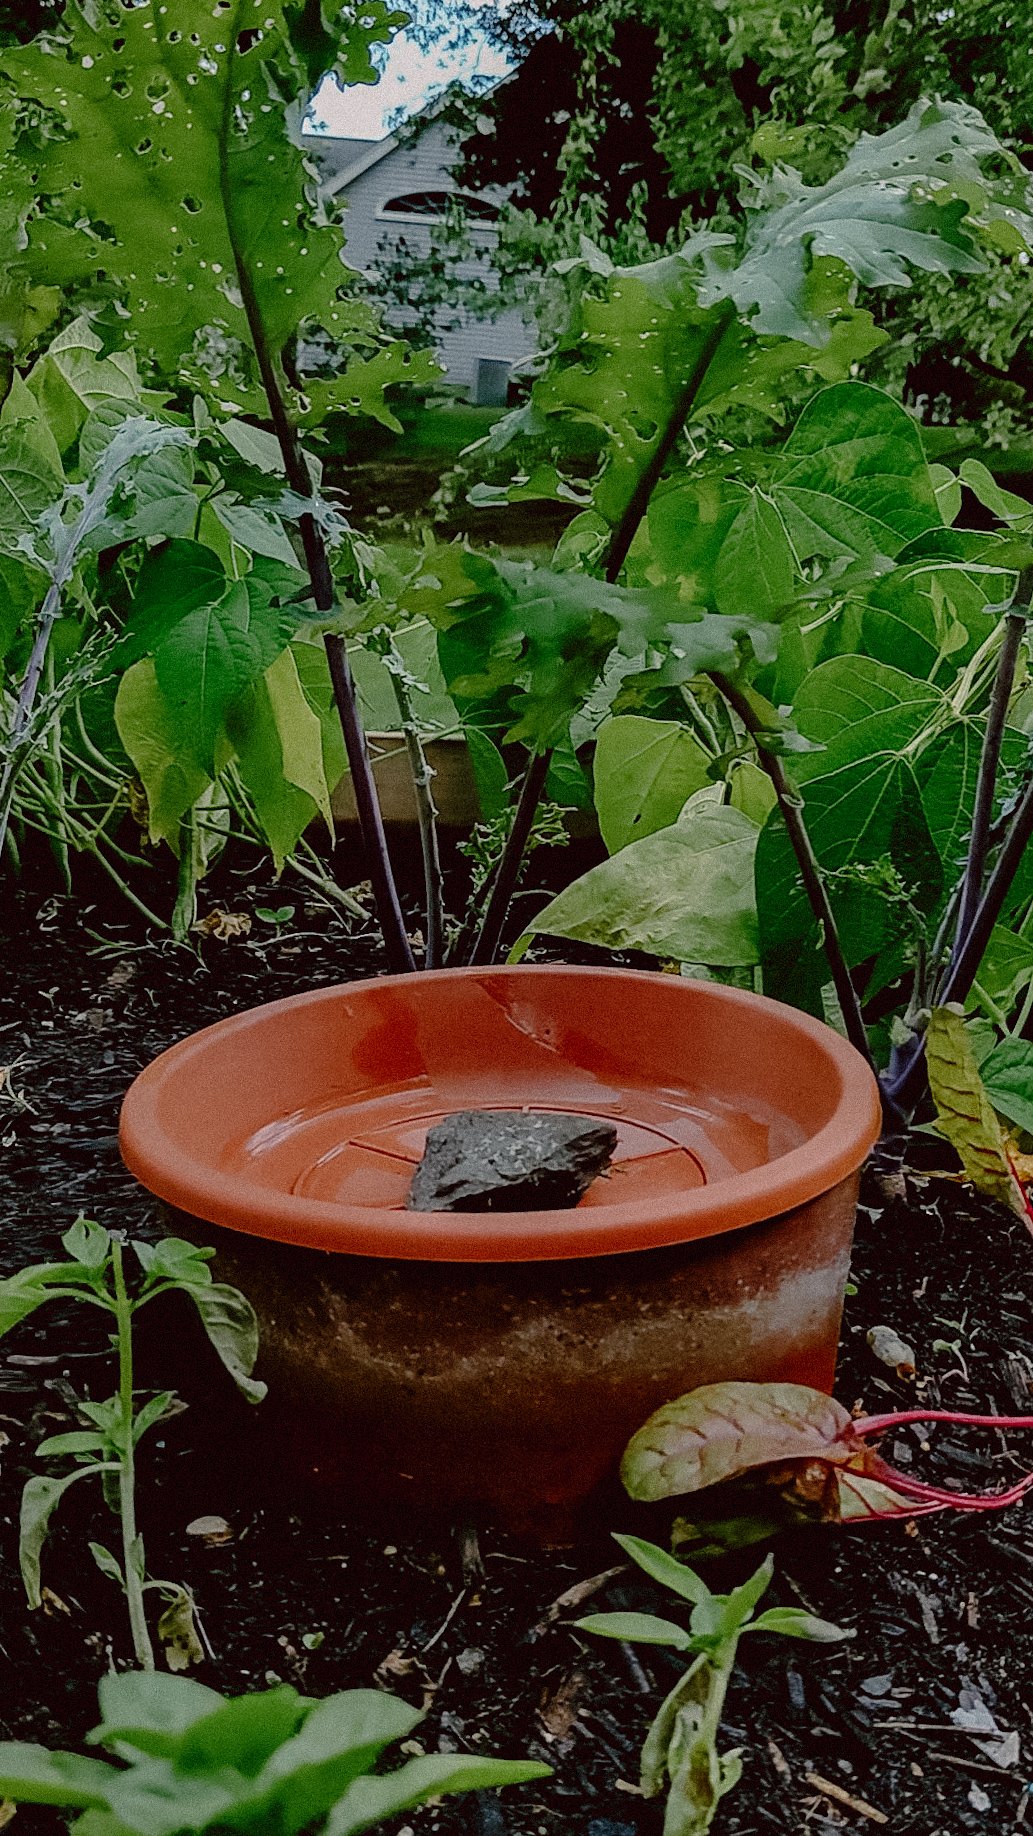 How to Make an Olla for Effortless Garden Irrigation